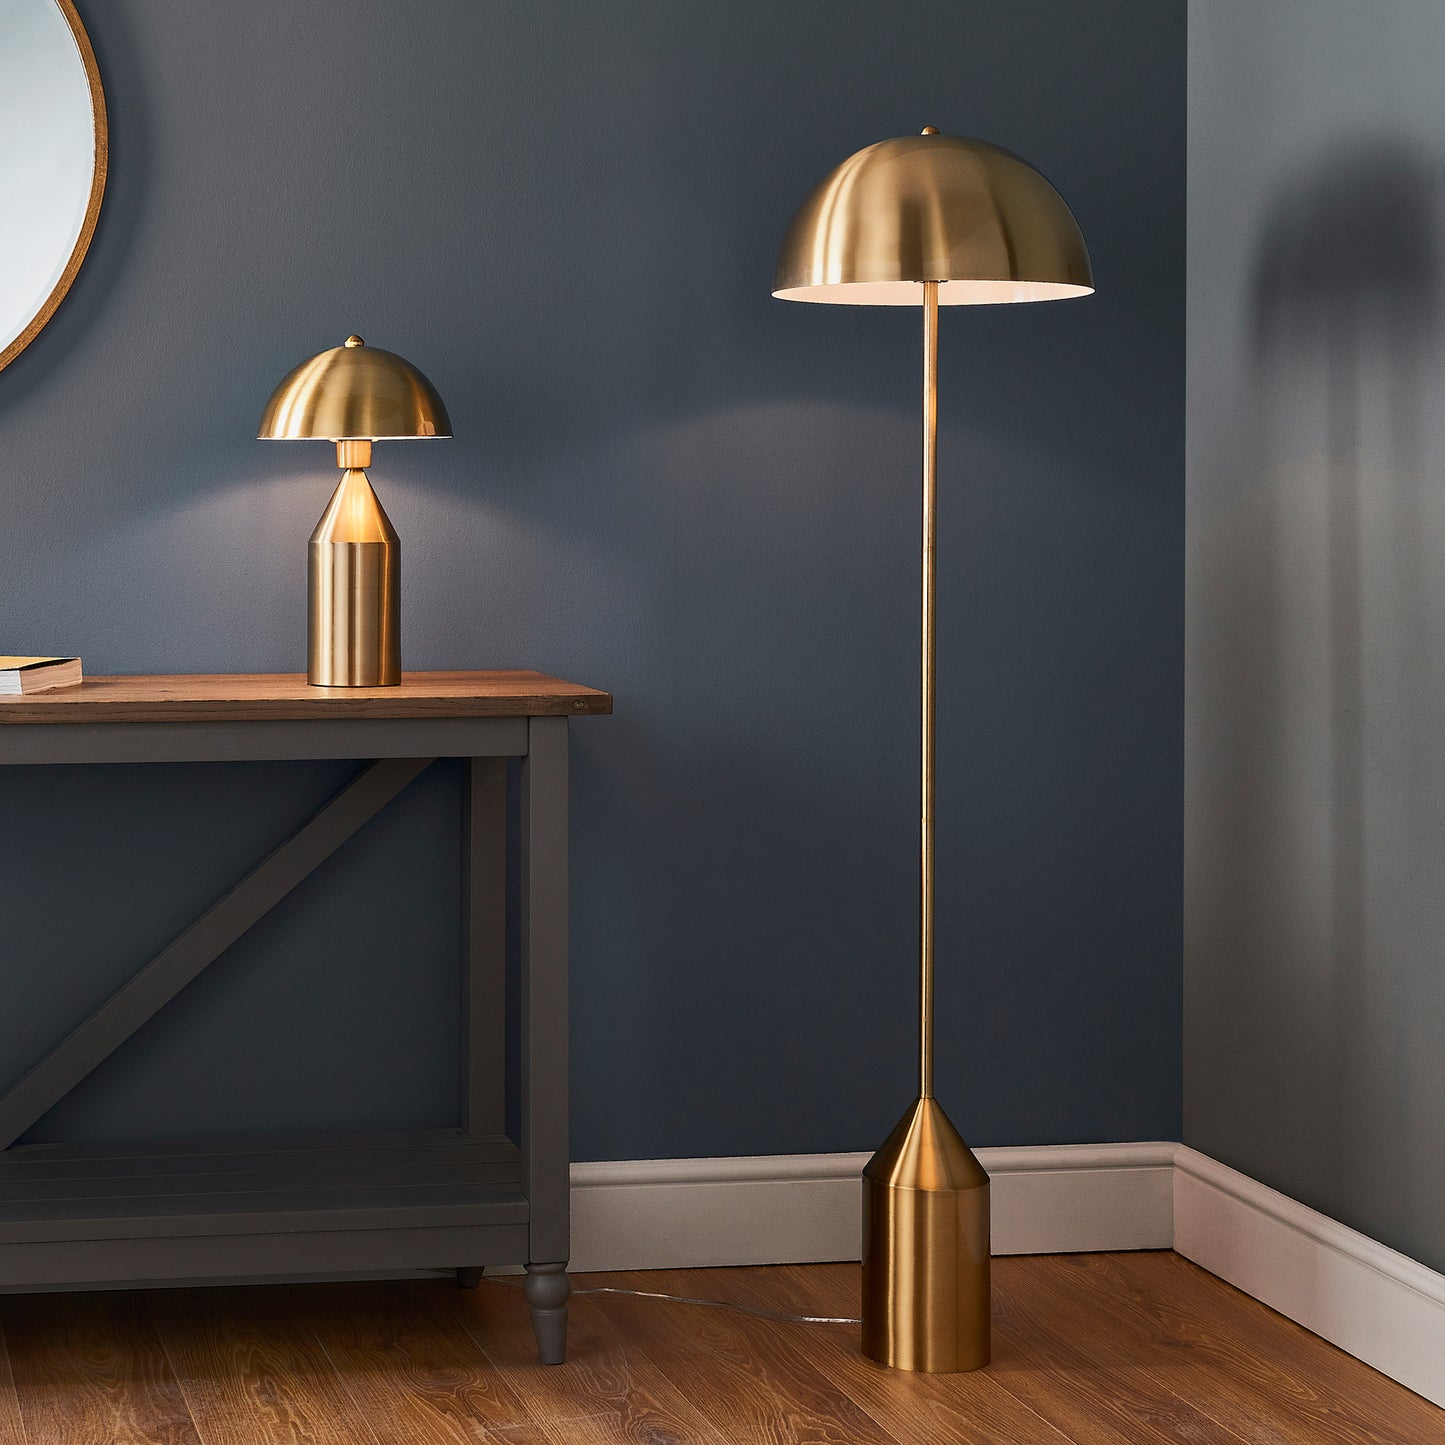 A Nova 1 Floor Light Antique Brass floor lamp next to a mirror, enhancing the interior decor of your home from Kikiathome.co.uk.